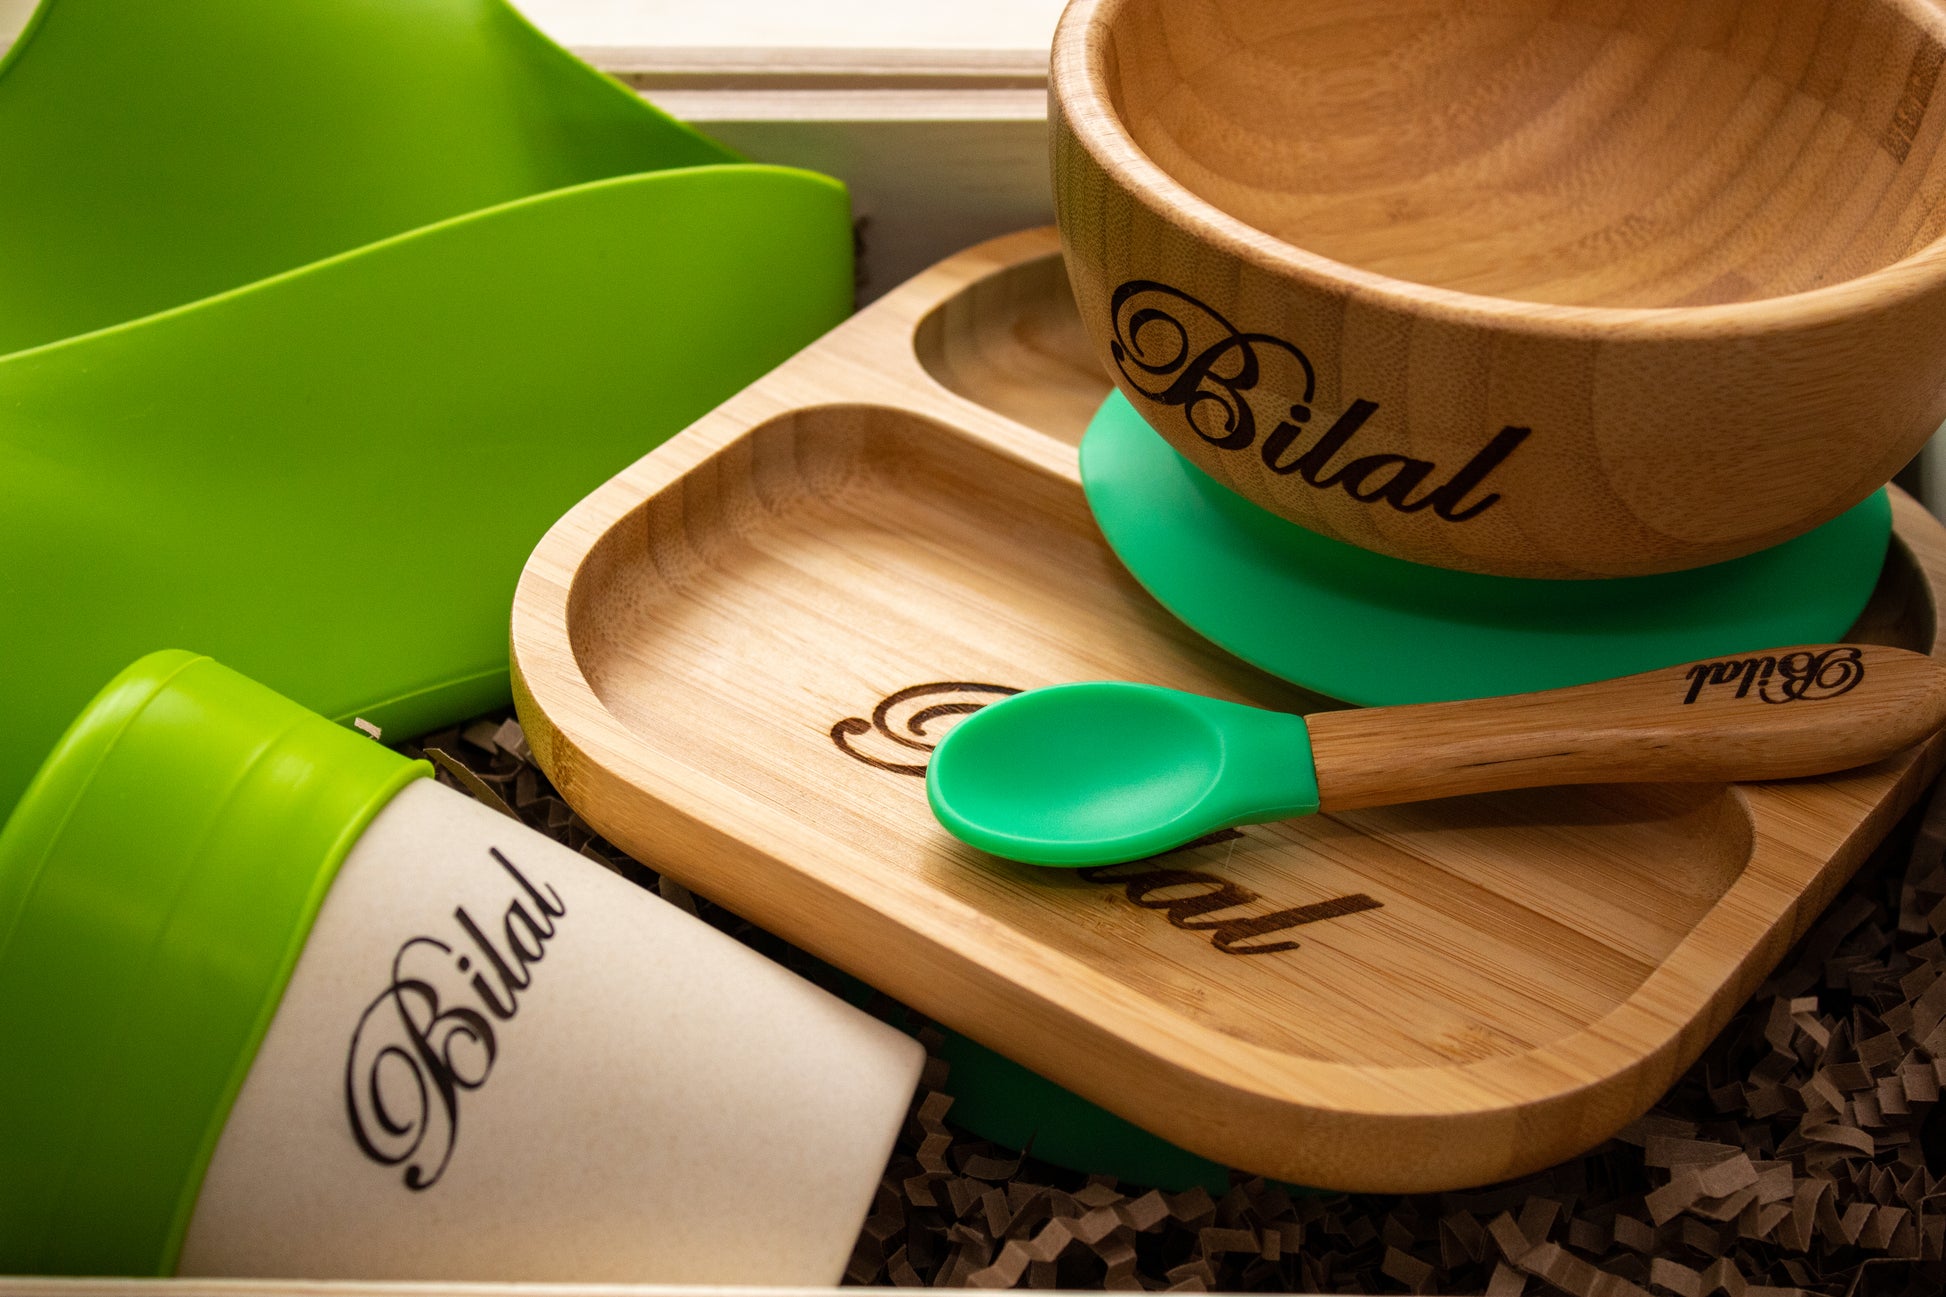 Personalised Wooden Tiny Dining Bamboo Plate, Bowl, Spoon And Babba Box  Silicon Green Bib and Cup - Green | Babba box.